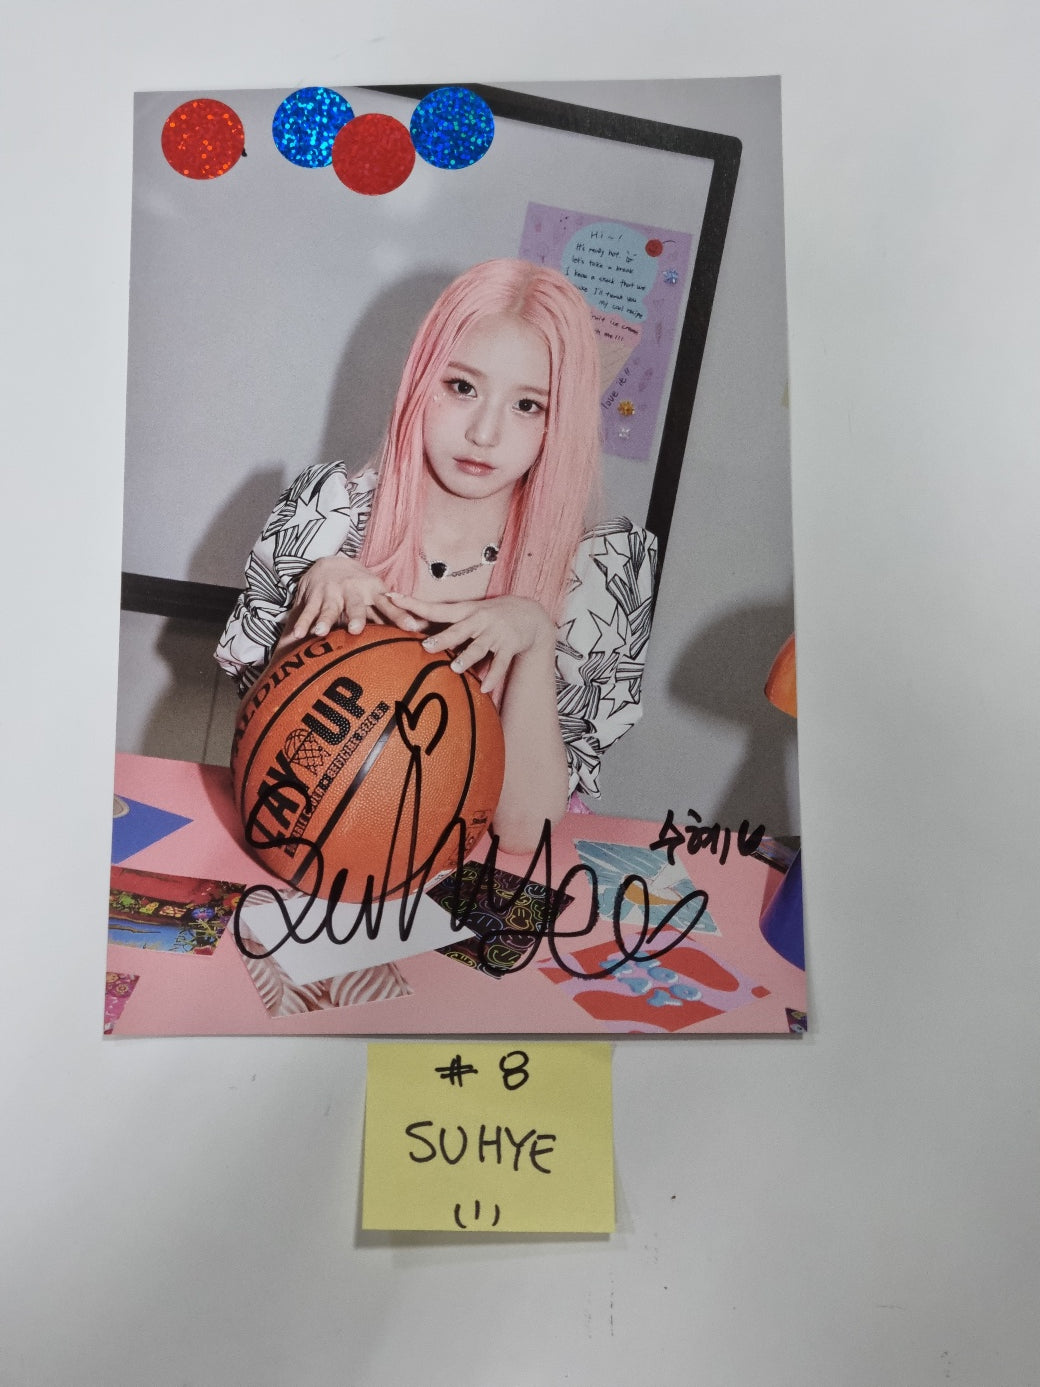 LIMELIGHT "LOVE & HAPPINESS" - A Cut Page From Fansign Event Album